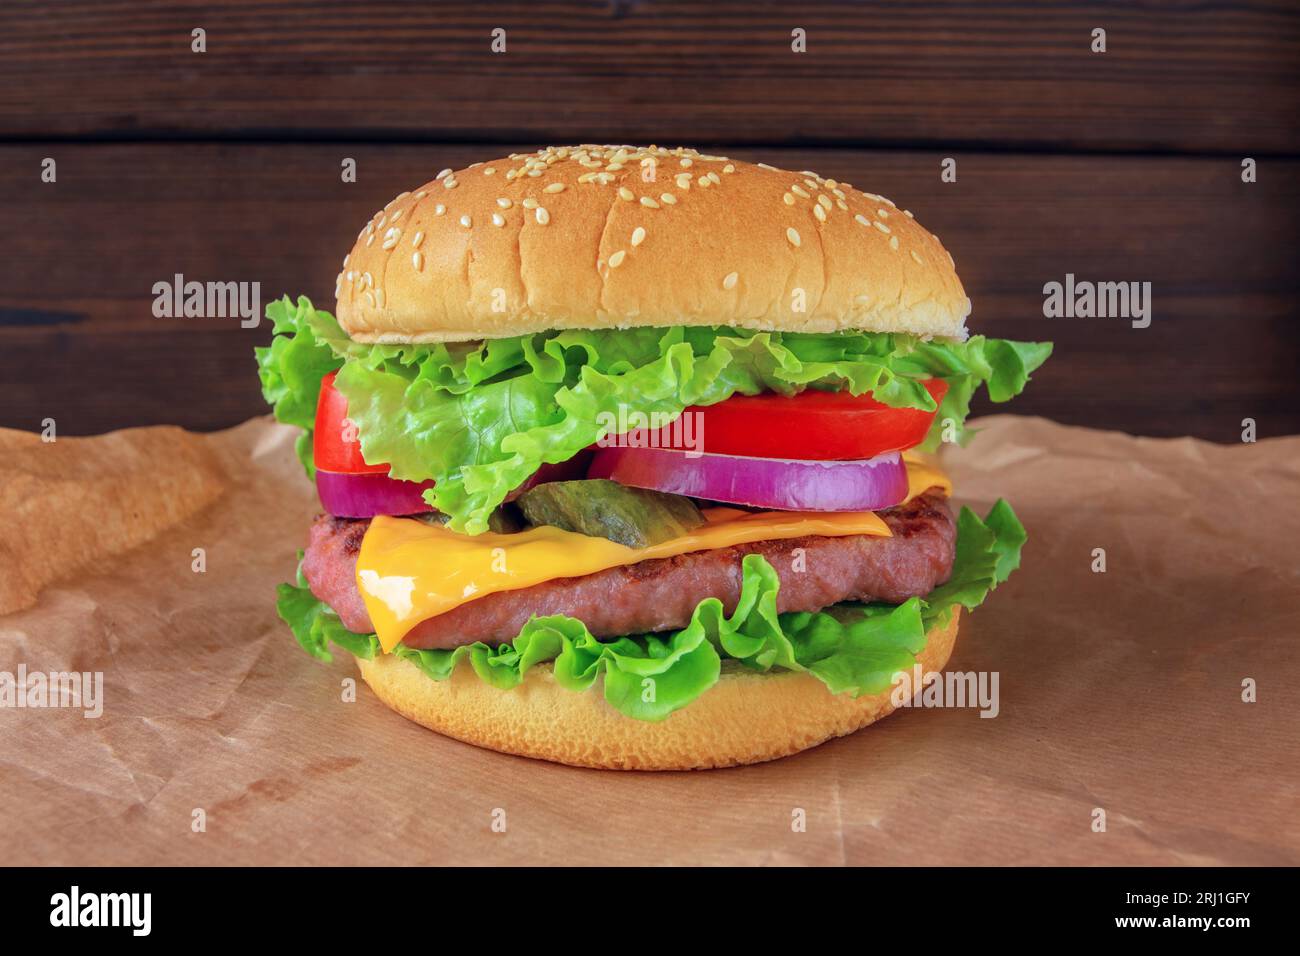 Hamburger or burger with patty of ground beef meat, cheese, lettuce, tomato, onion,  pickles and bun with sesame seeds. Tasty colorful sandwich on the Stock Photo